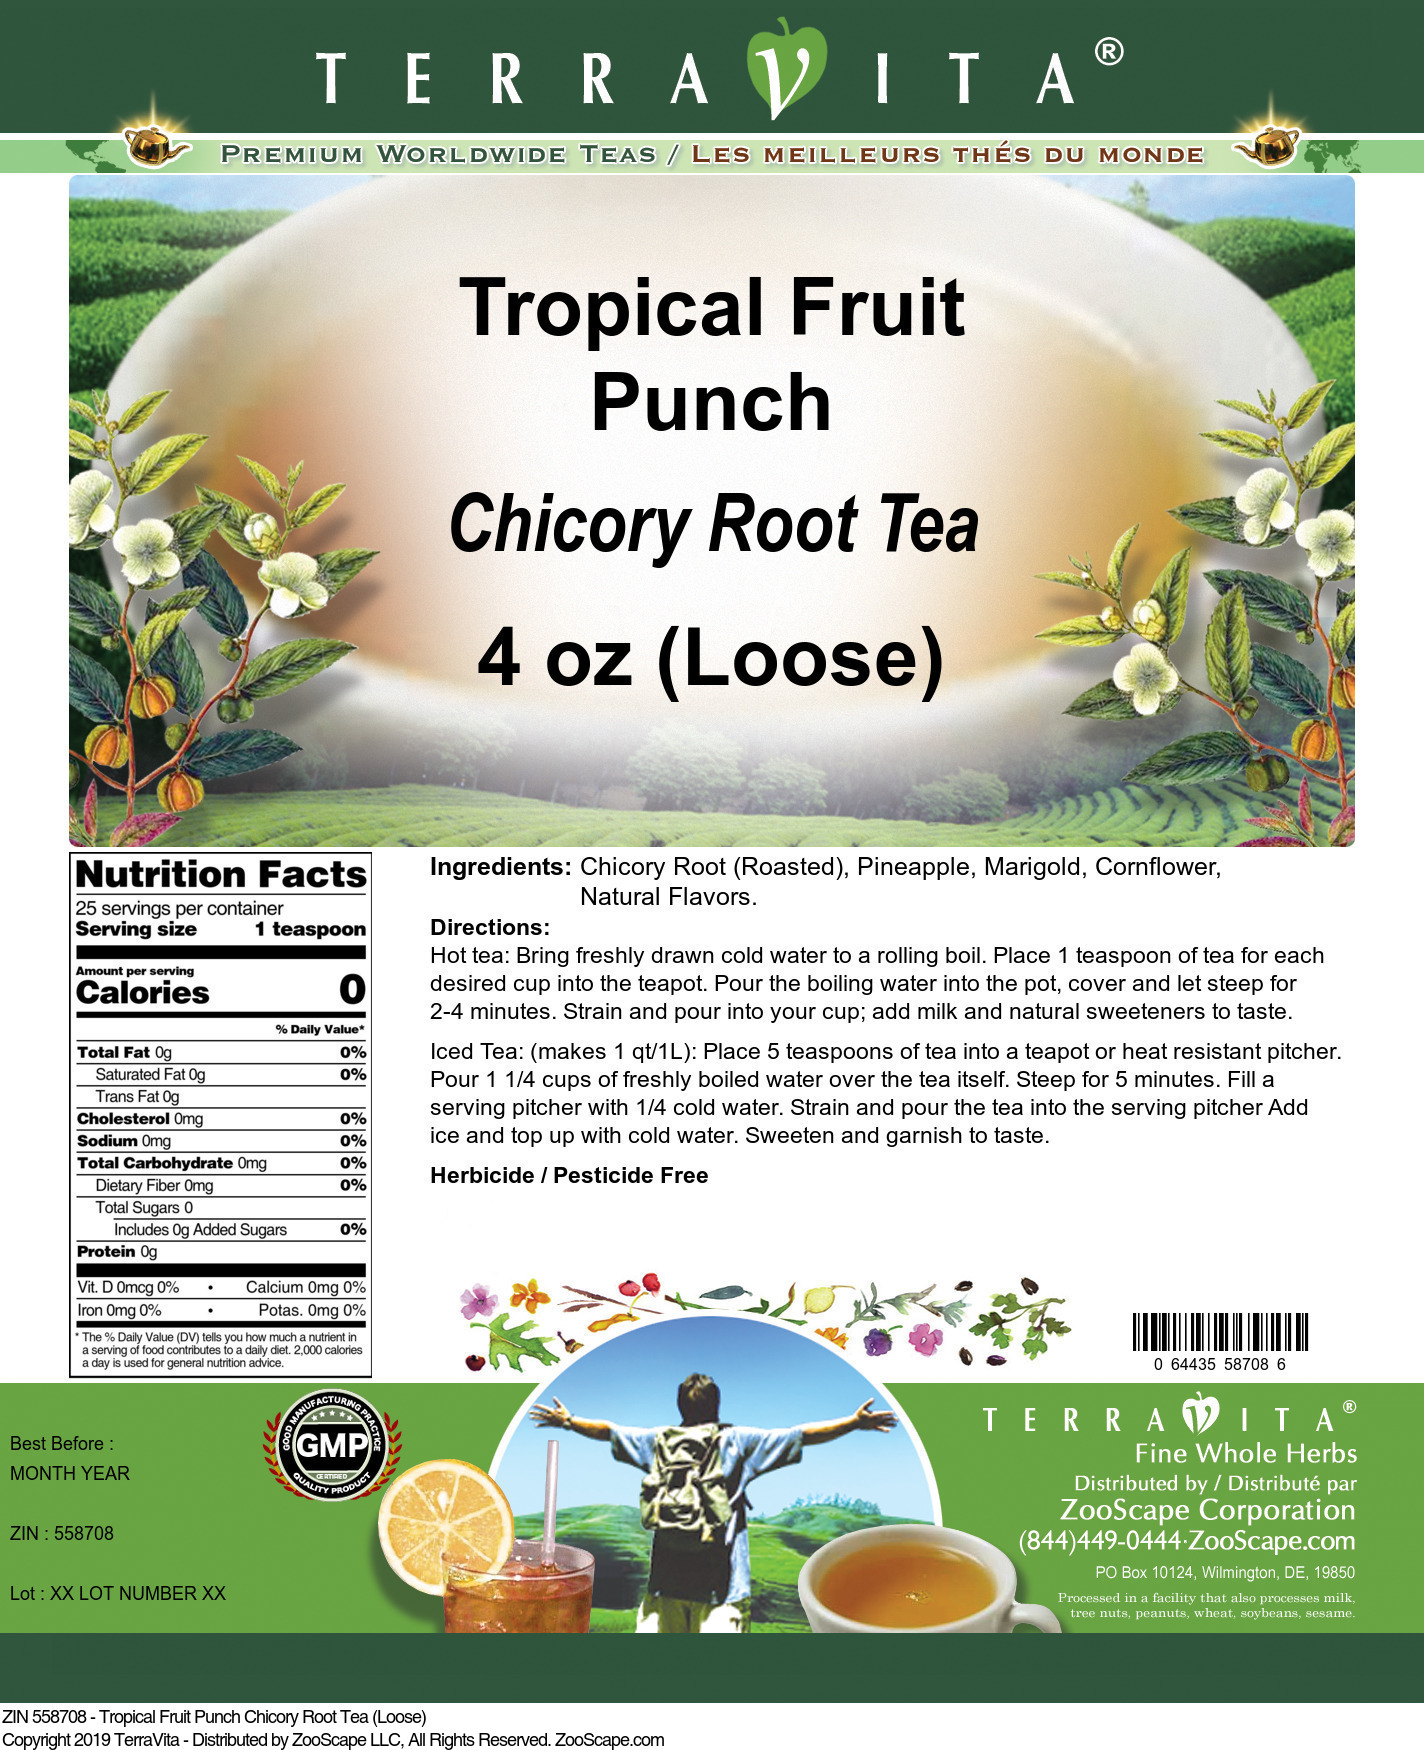 Tropical Fruit Punch Chicory Root Tea (Loose) - Label